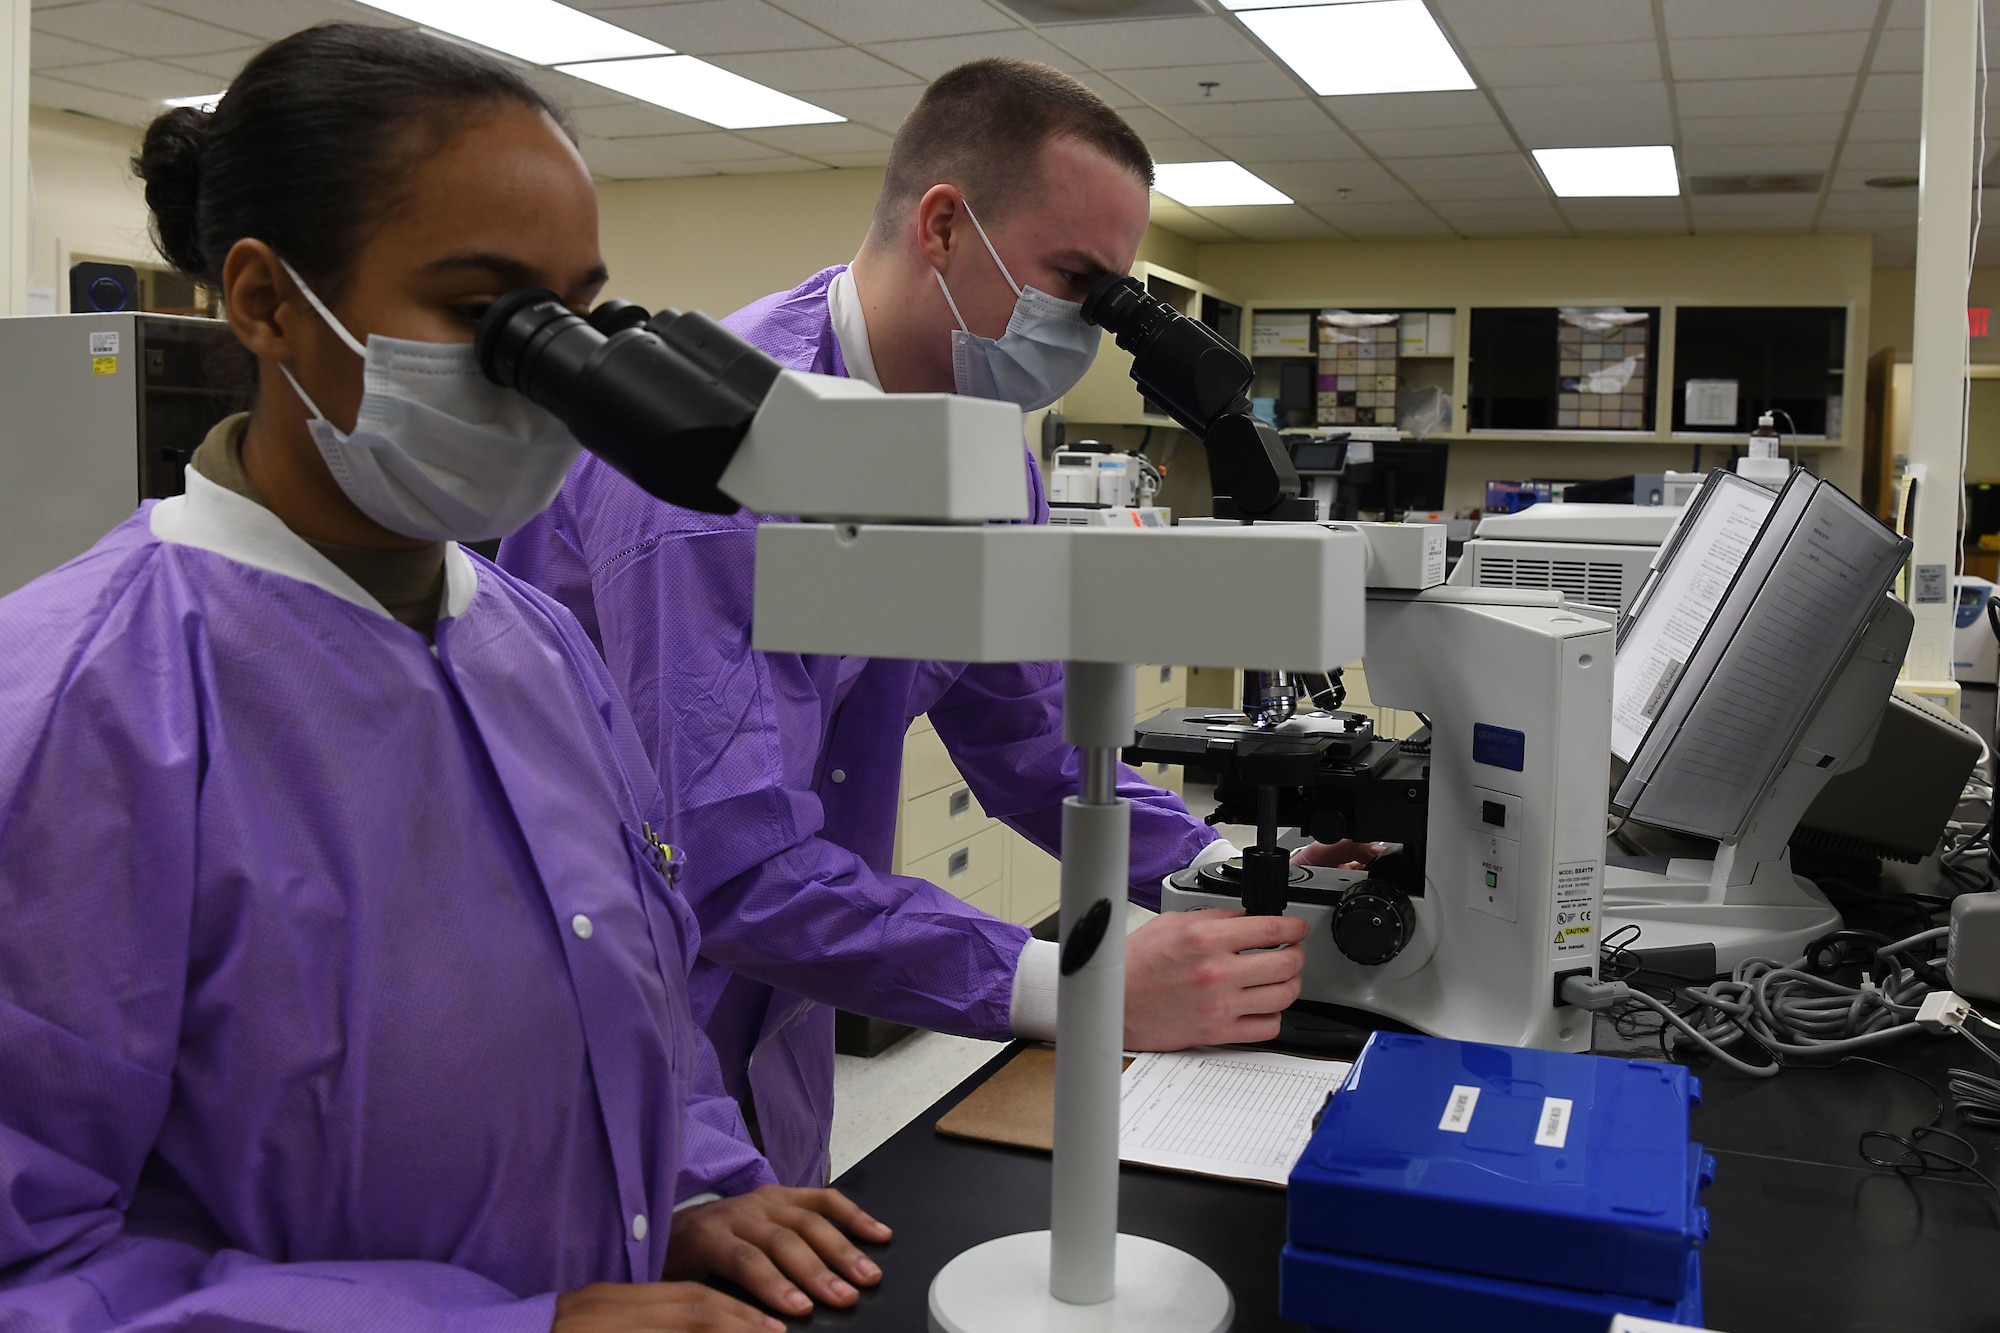 Staff Sgt. Cody Emery and Airman 1st Class Jordan Cleveland, 30th Healthcare Operations Squadron laboratory technicians, conduct microscope training, April 20, 2020, at Vandenberg Air Force Base, Calif.